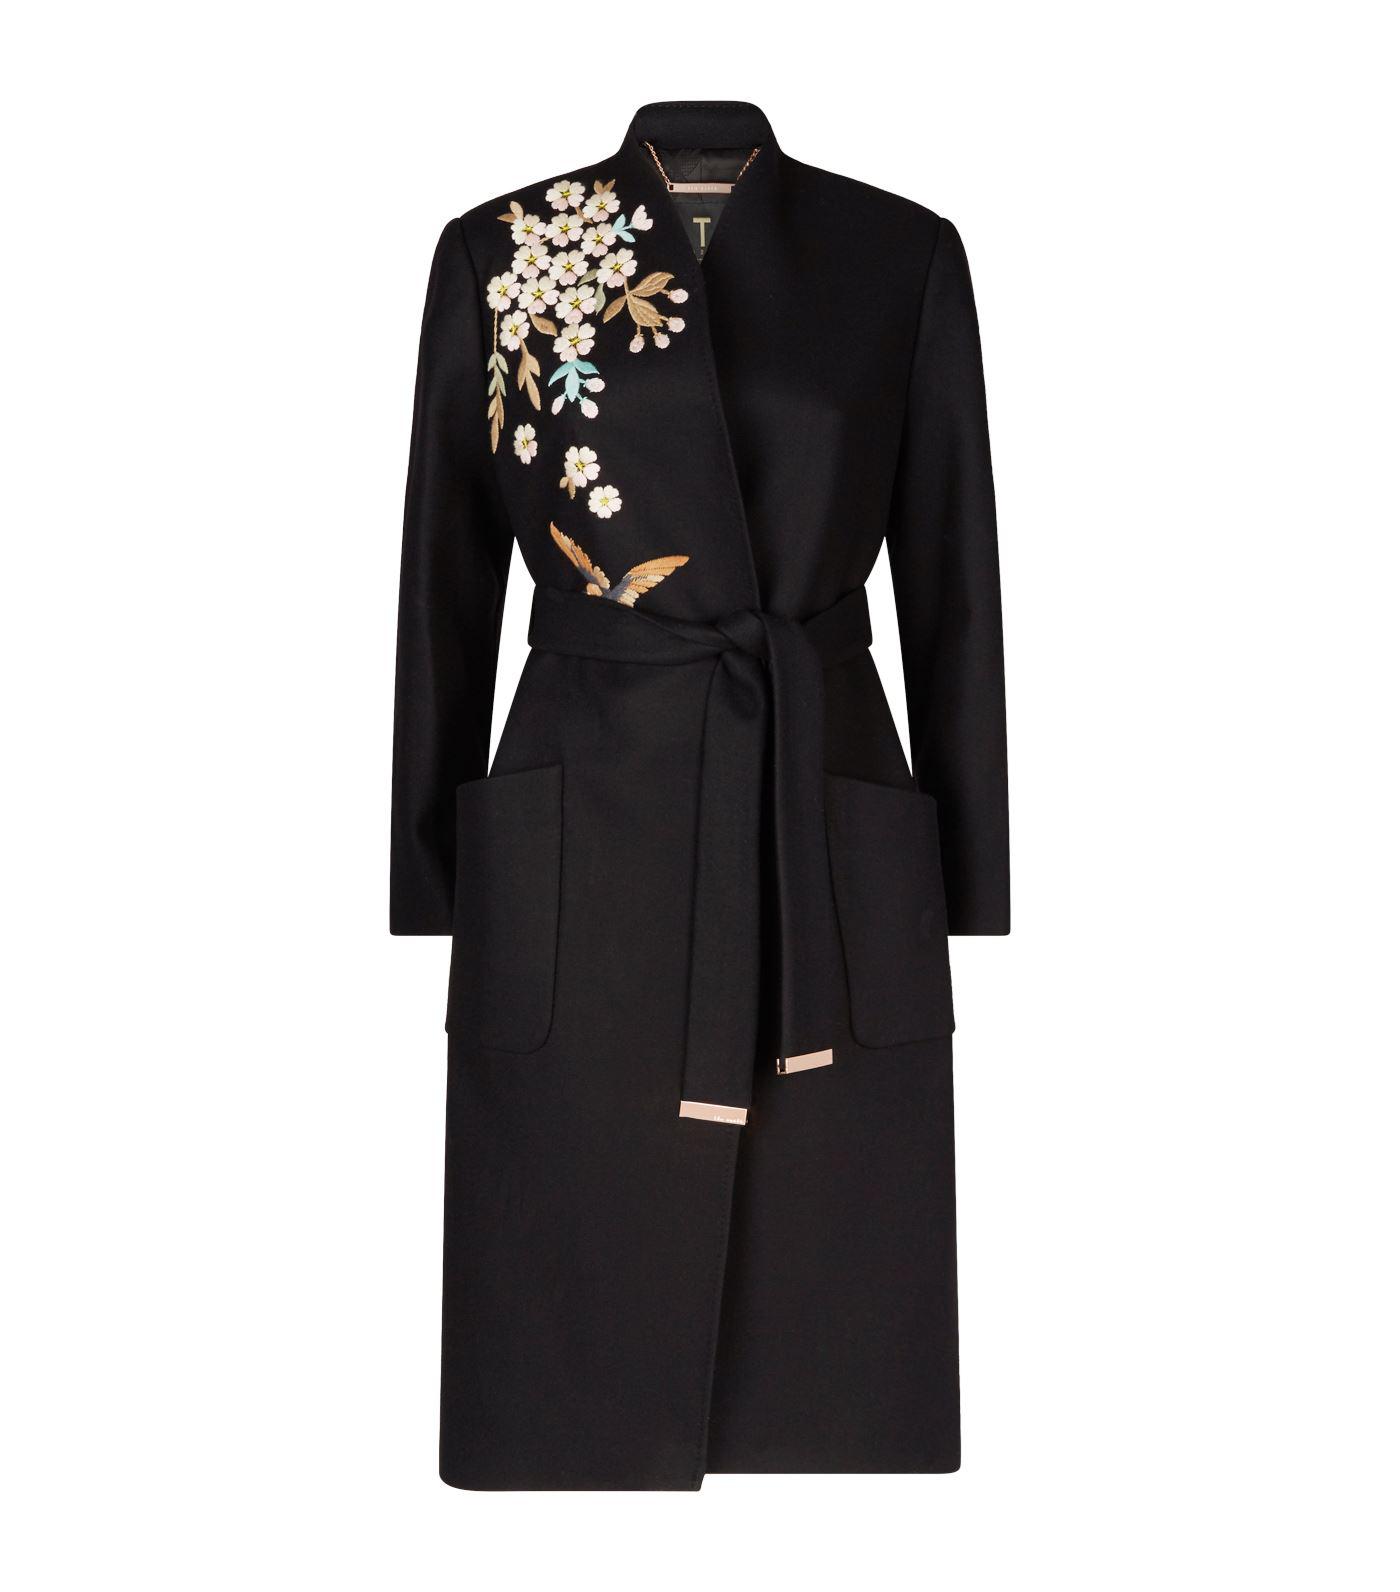 Ted Baker Graceful Embroidered Wool Coat in Black - Lyst